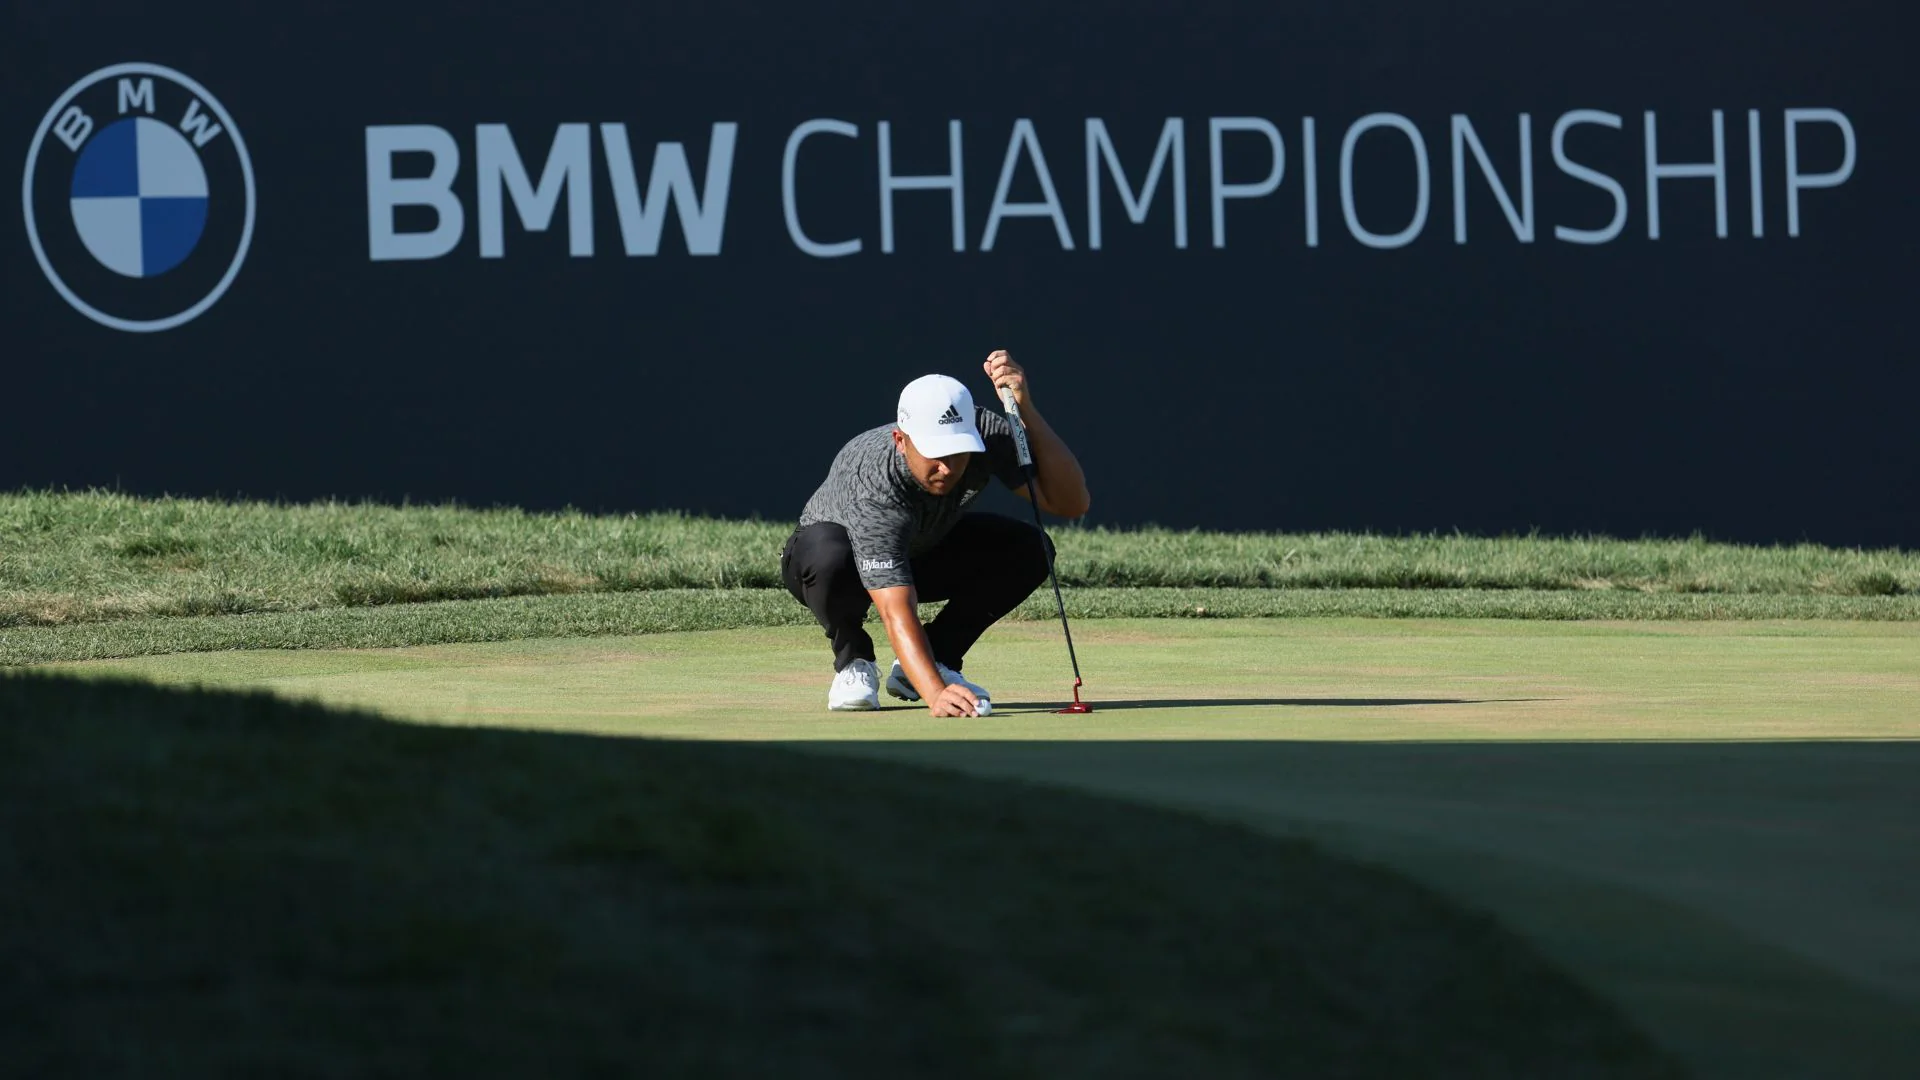 What’s on the line Sunday at BMW Championship? No. 1 seed, East Lake, Presidents Cup spots